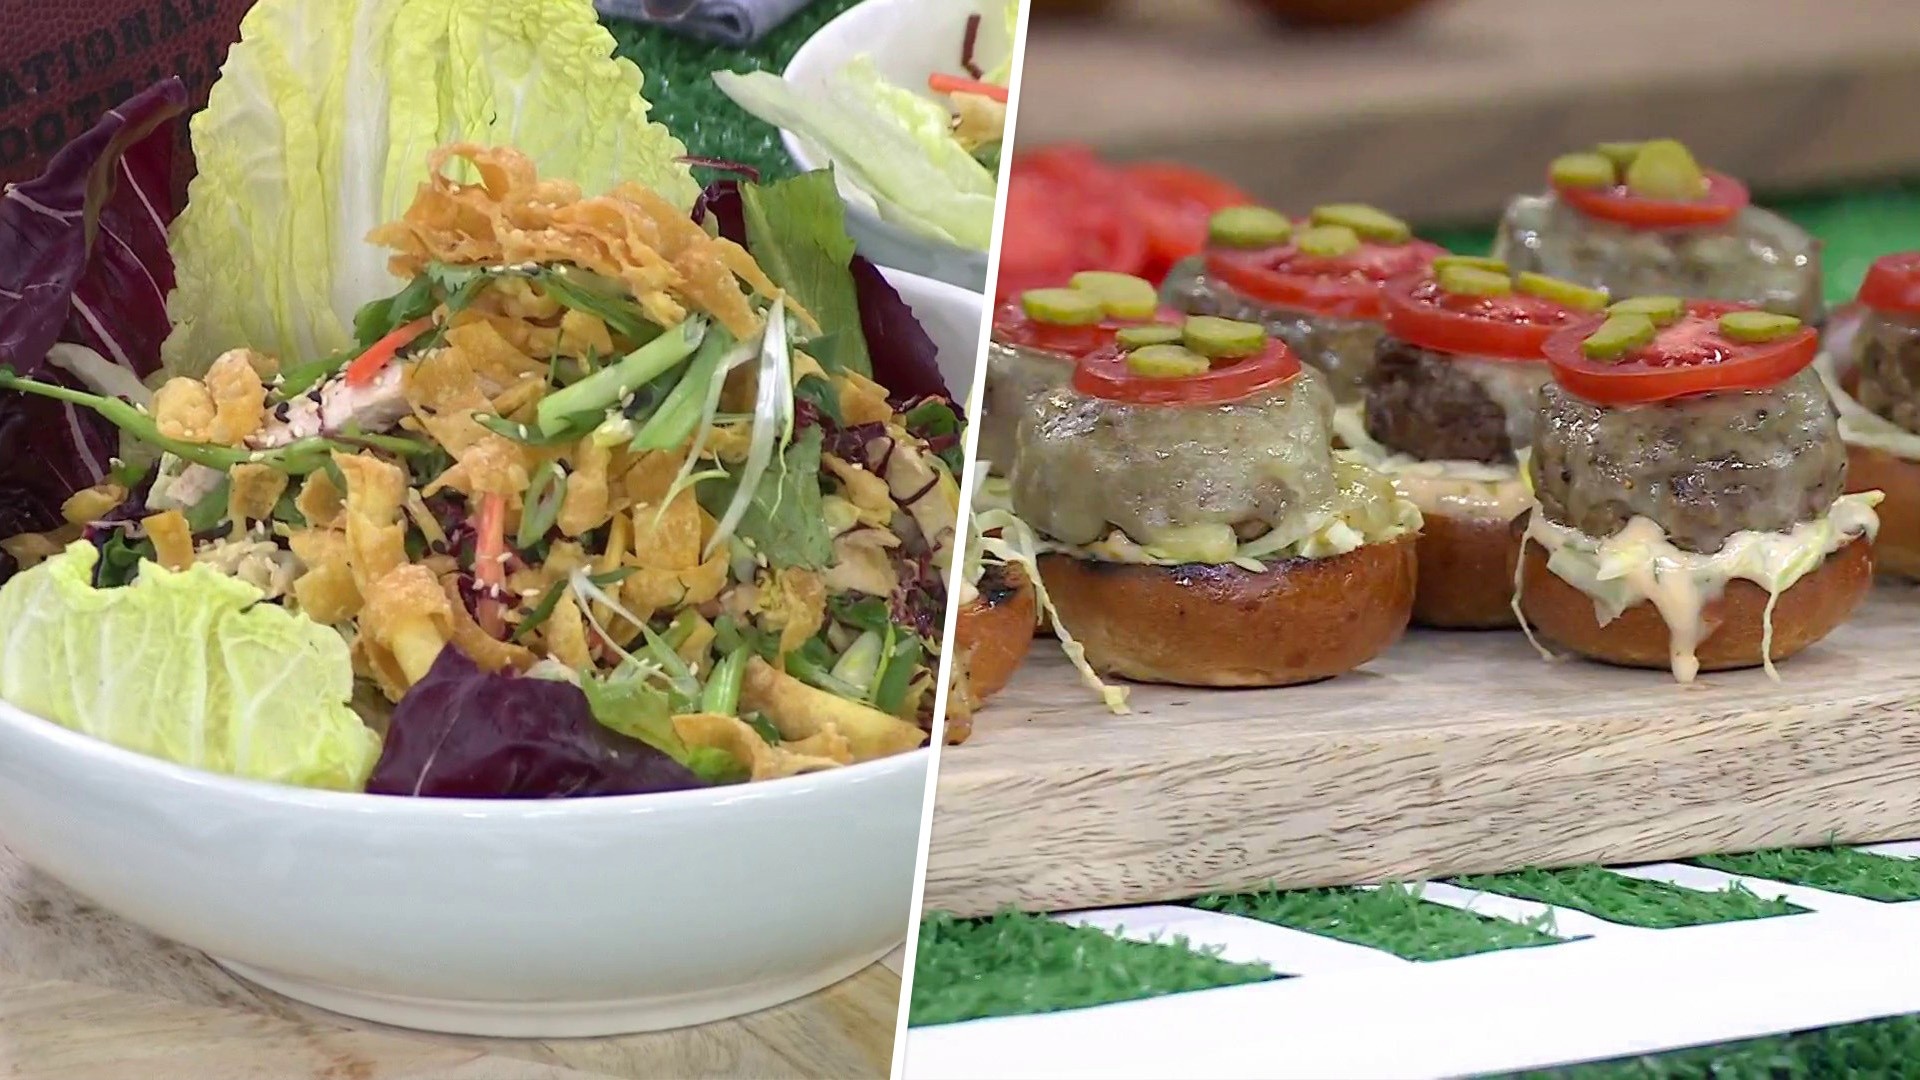 Chinois chicken salad and sliders: Get Wolfgang Puck's recipes!